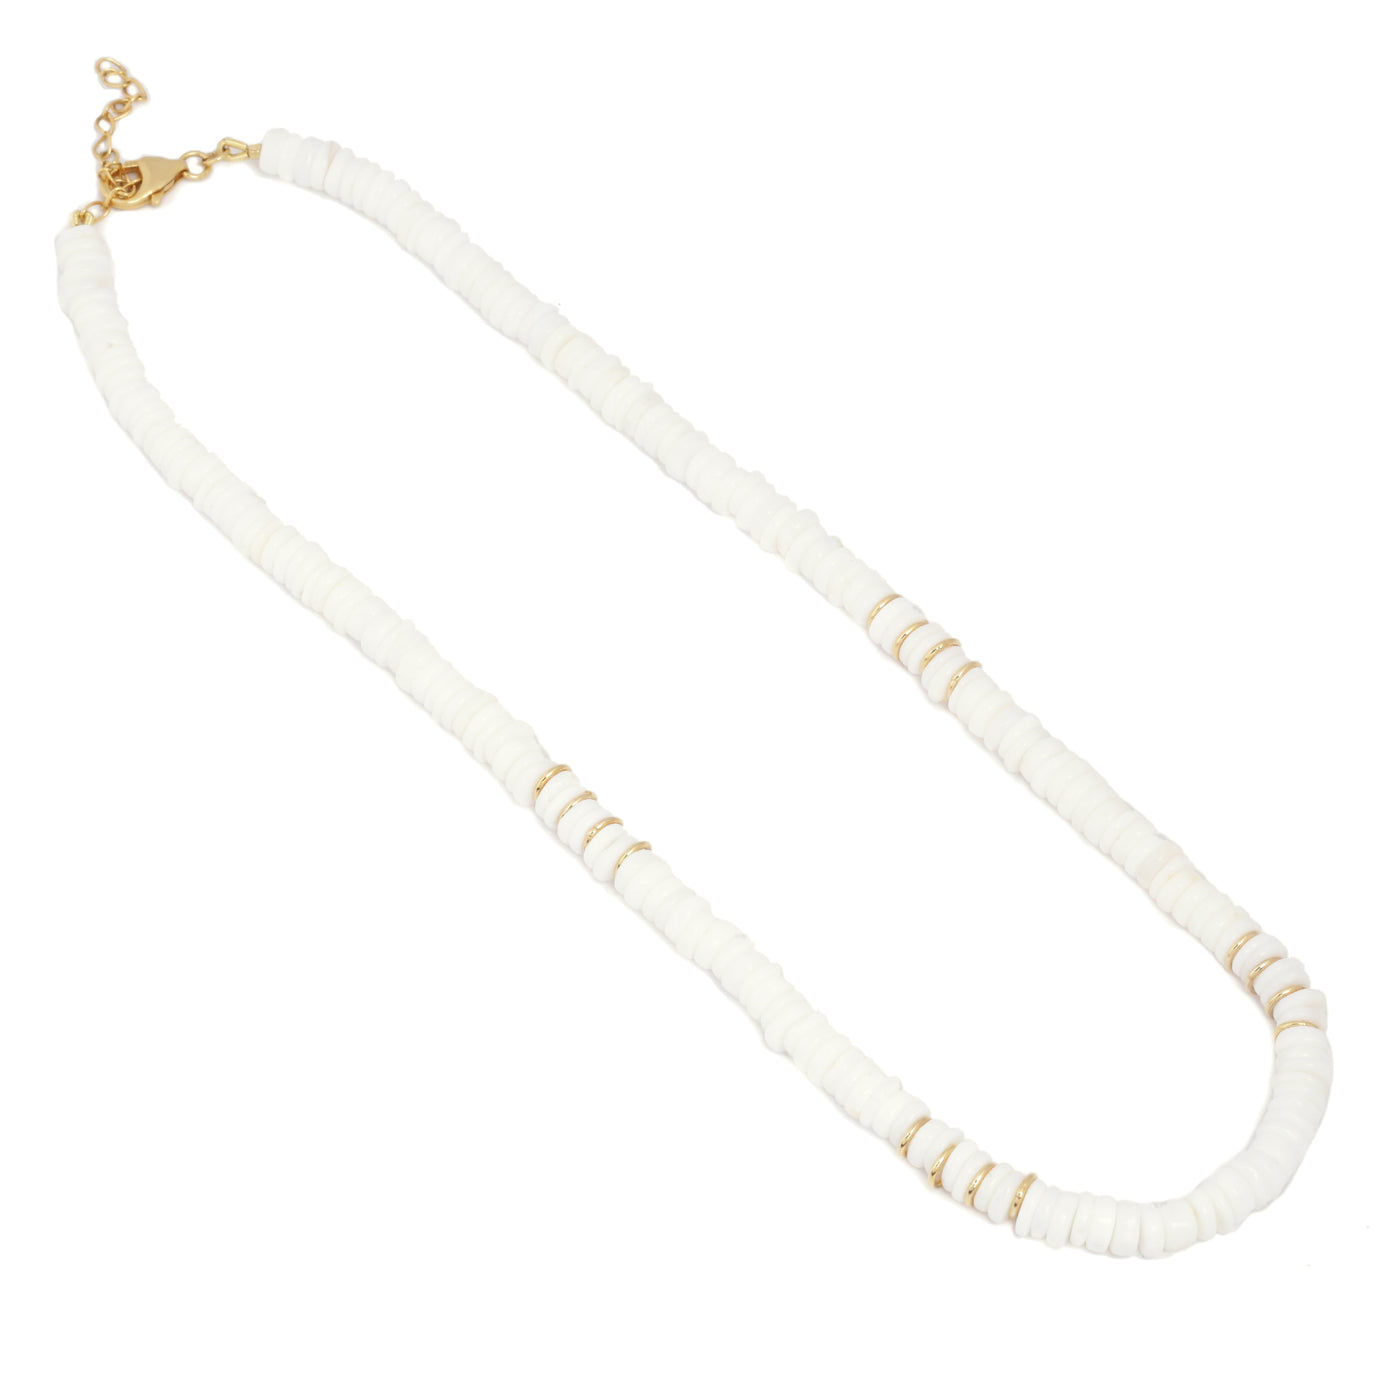 White Opal beads necklace